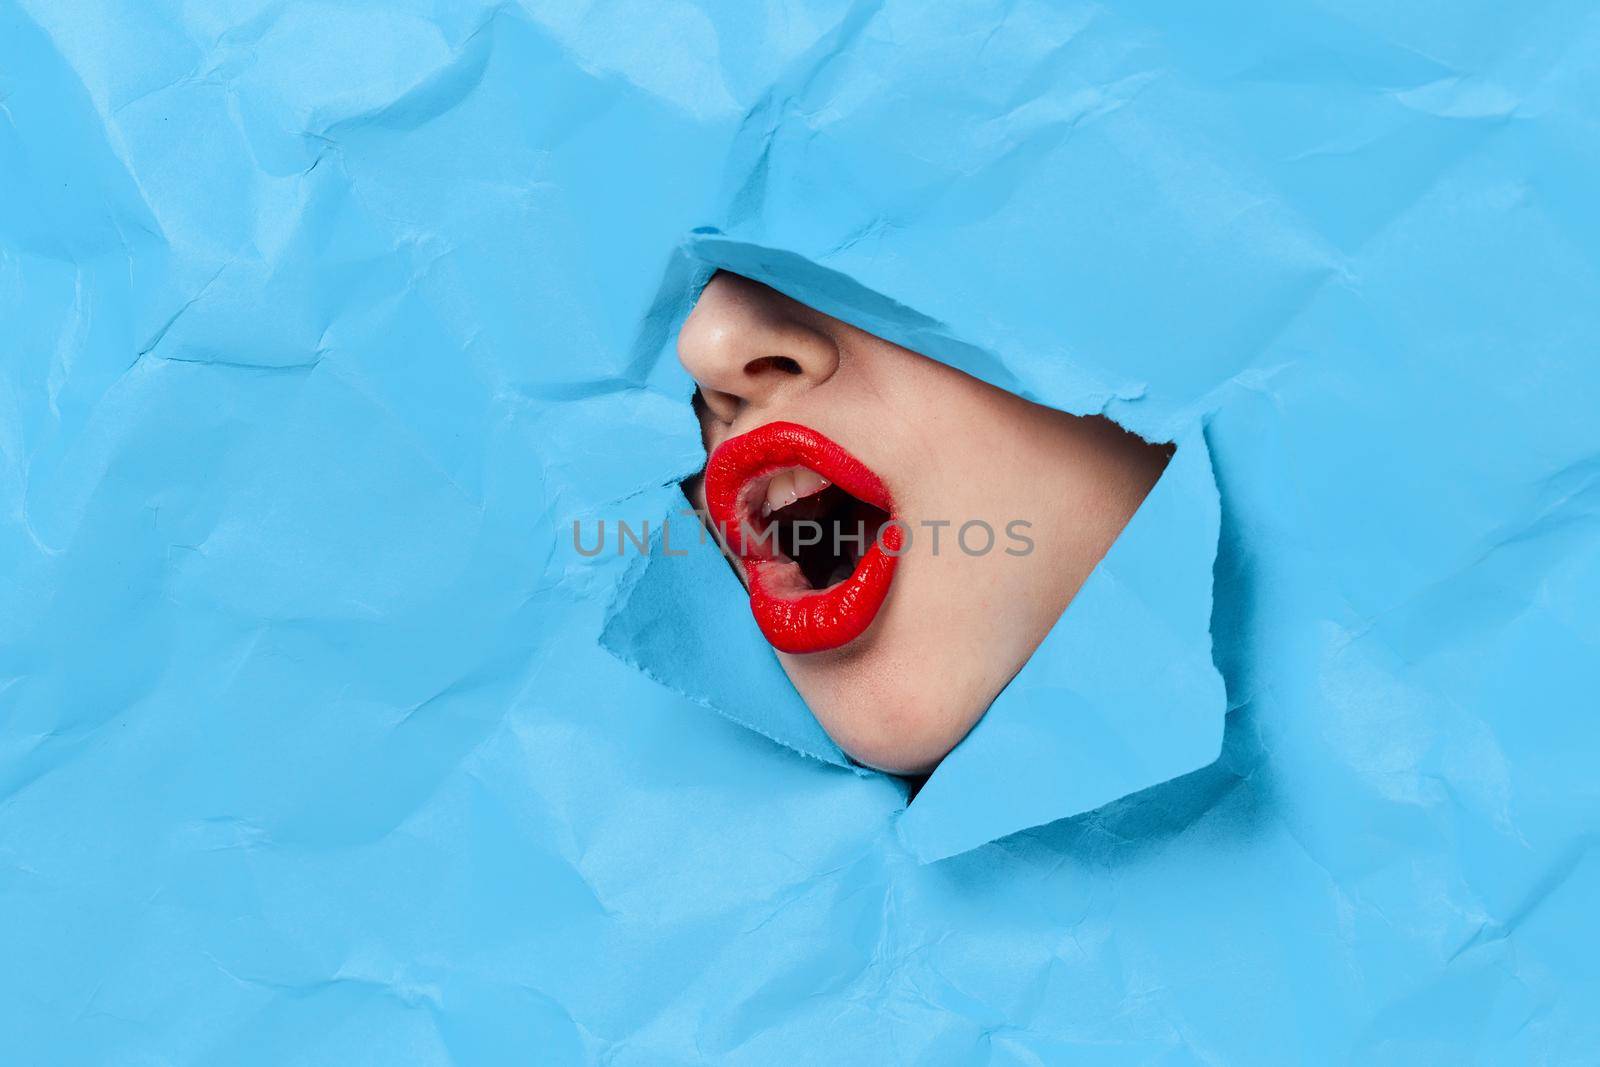 woman's face breaks through blue mockup close-up. High quality photo